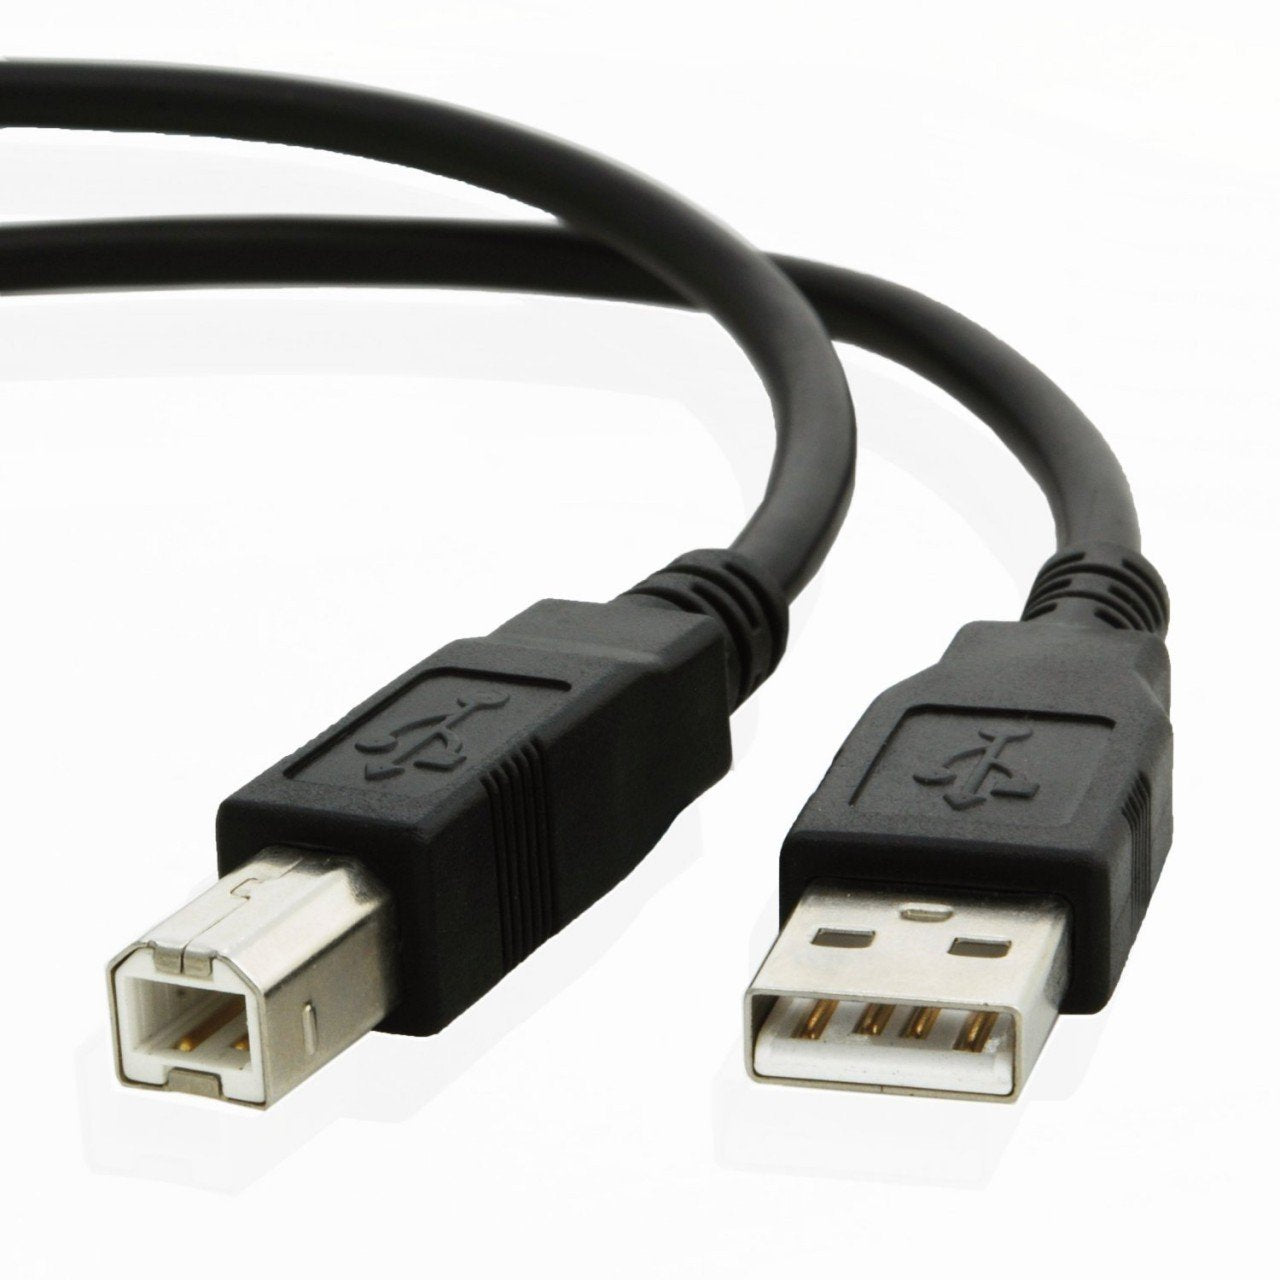 USB cable for Hp ENVY 5660